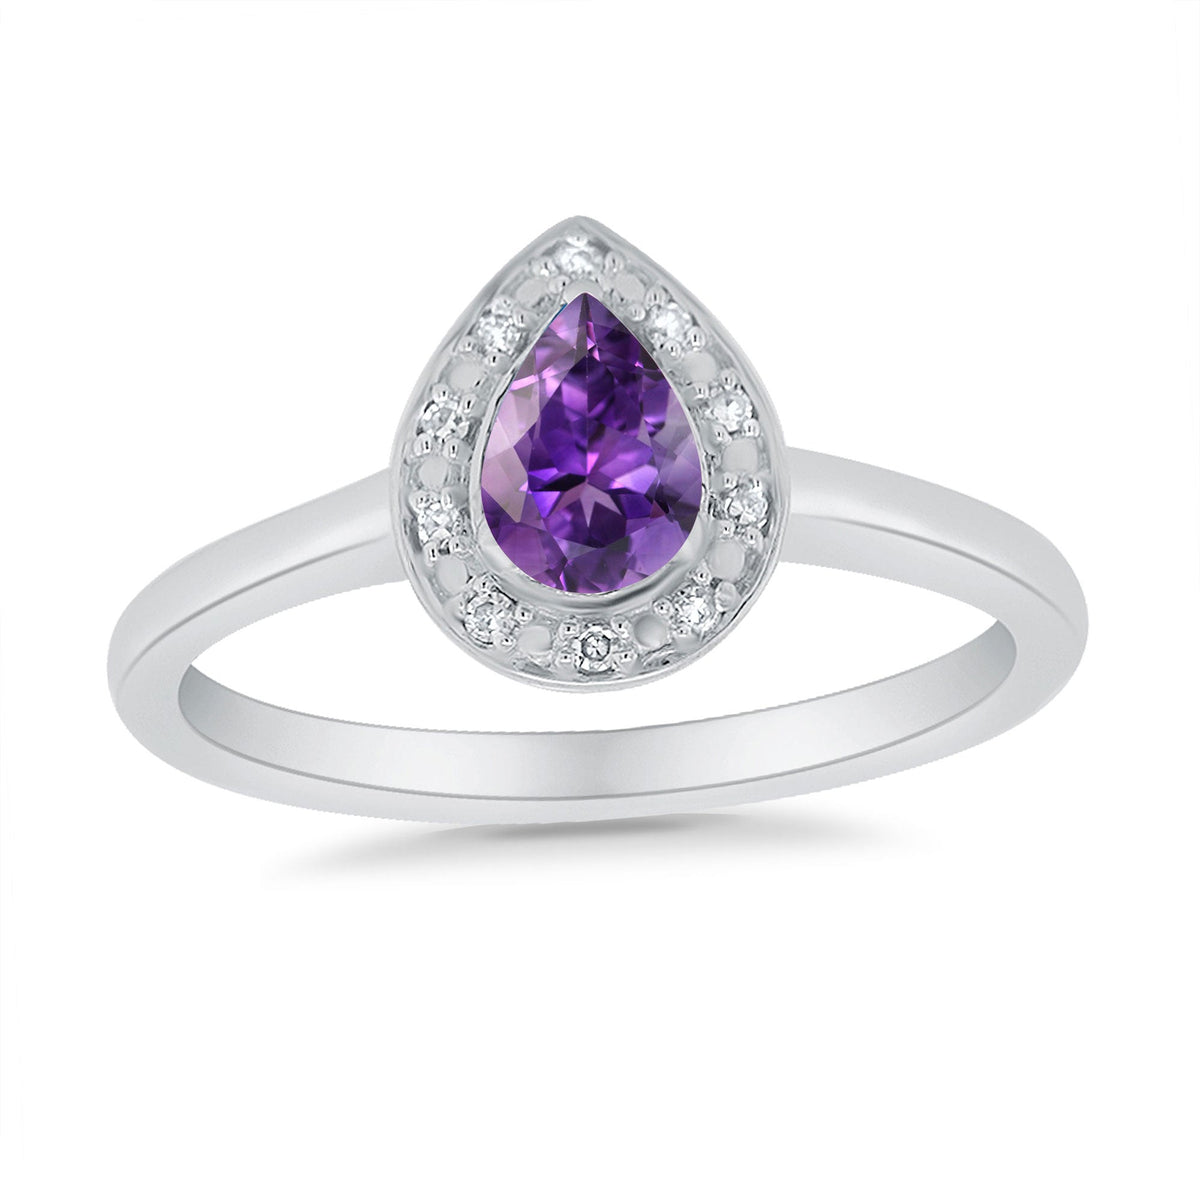 9ct white gold 6x4mm pear shape amethyst &amp; diamond cluster ring 0.04ct